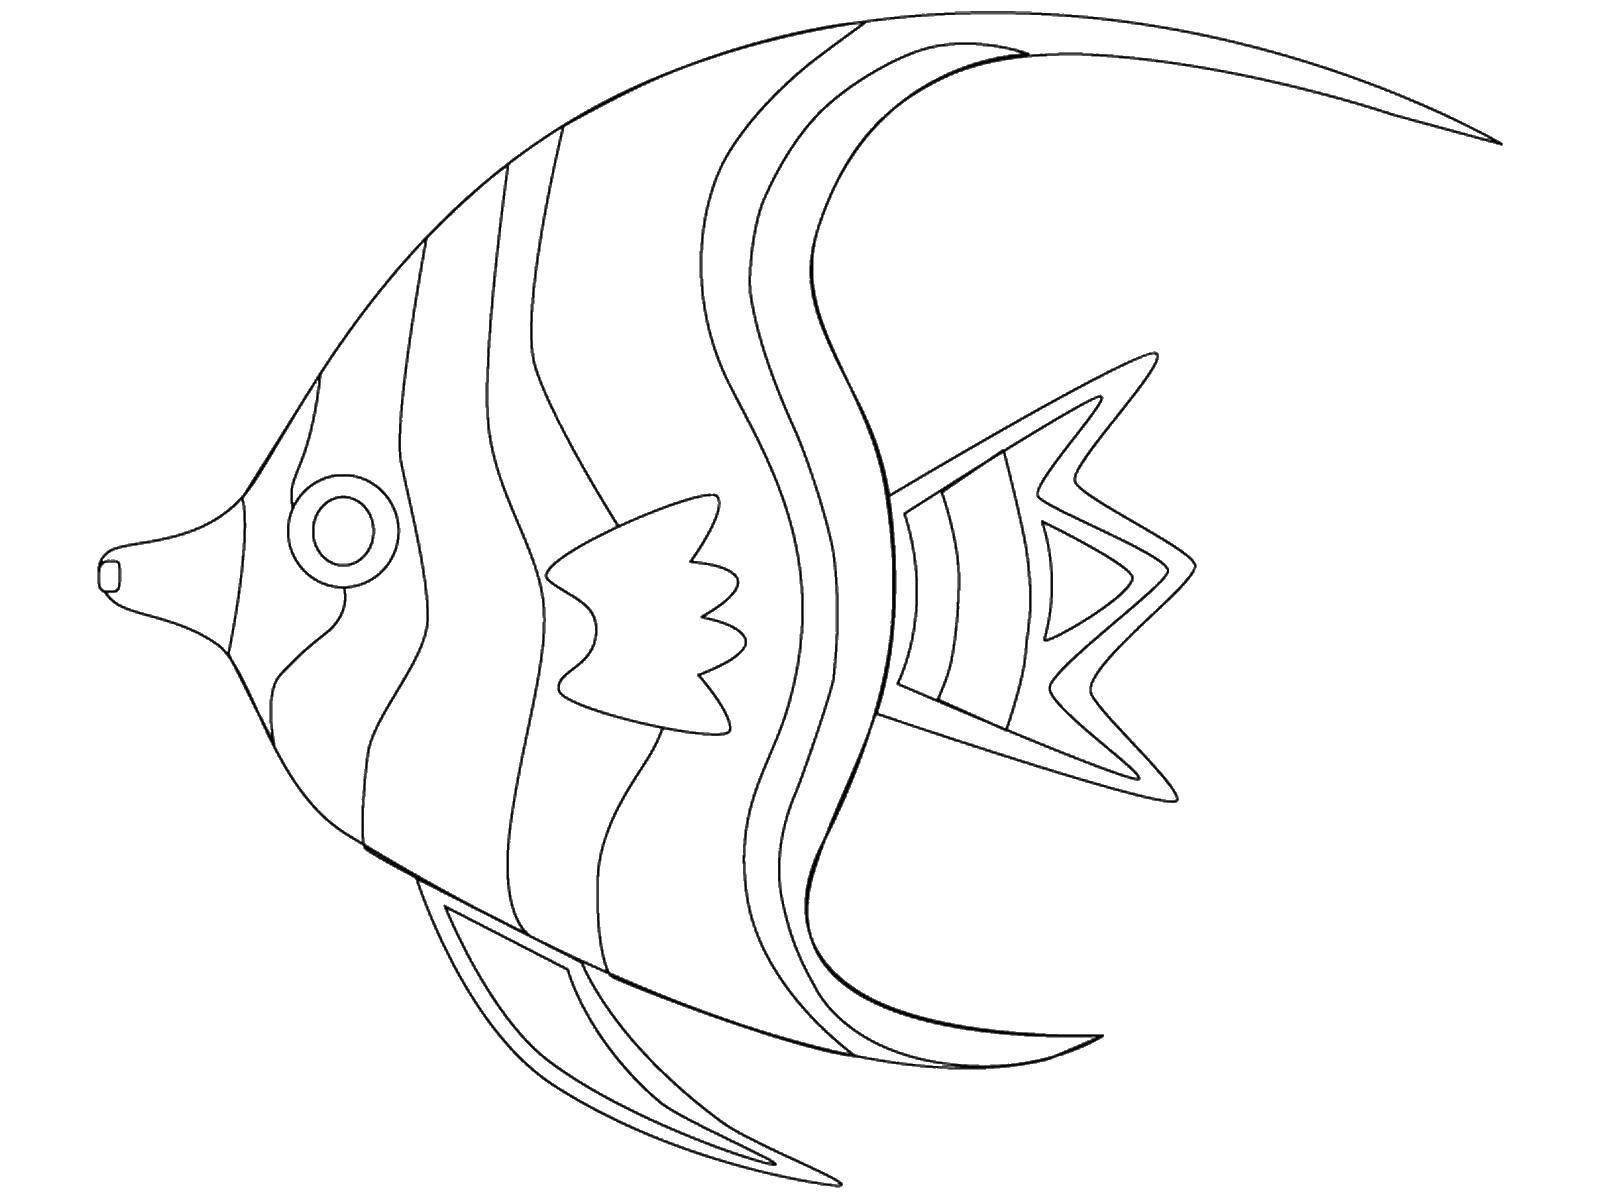 Coloring The angelfish. Category fish. Tags:  marine inhabitants, the sea, fish, water.